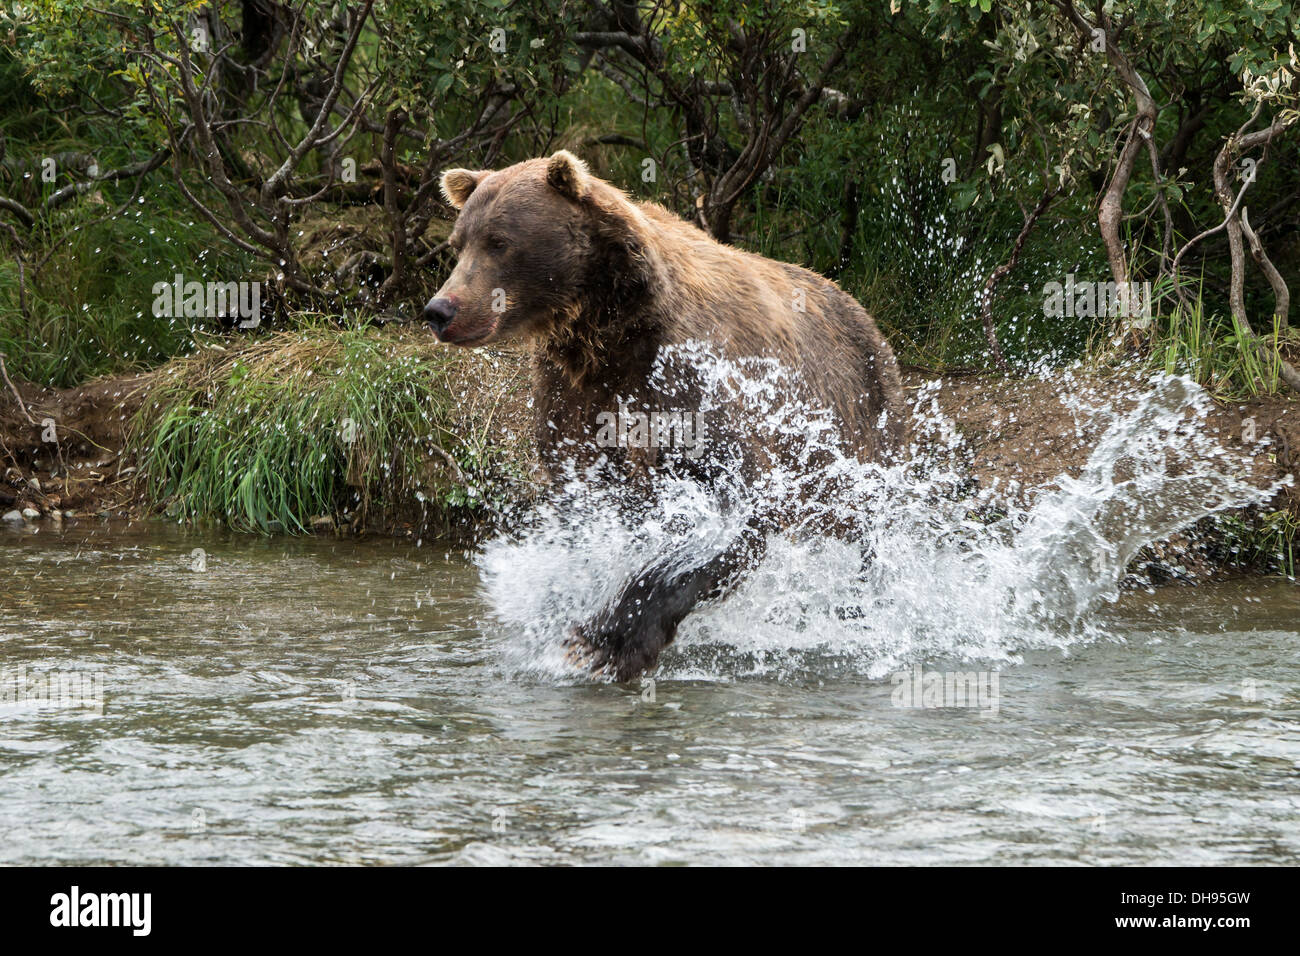 Grizzly bear (Ursus arctos gyas) rushing into water Stock Photo